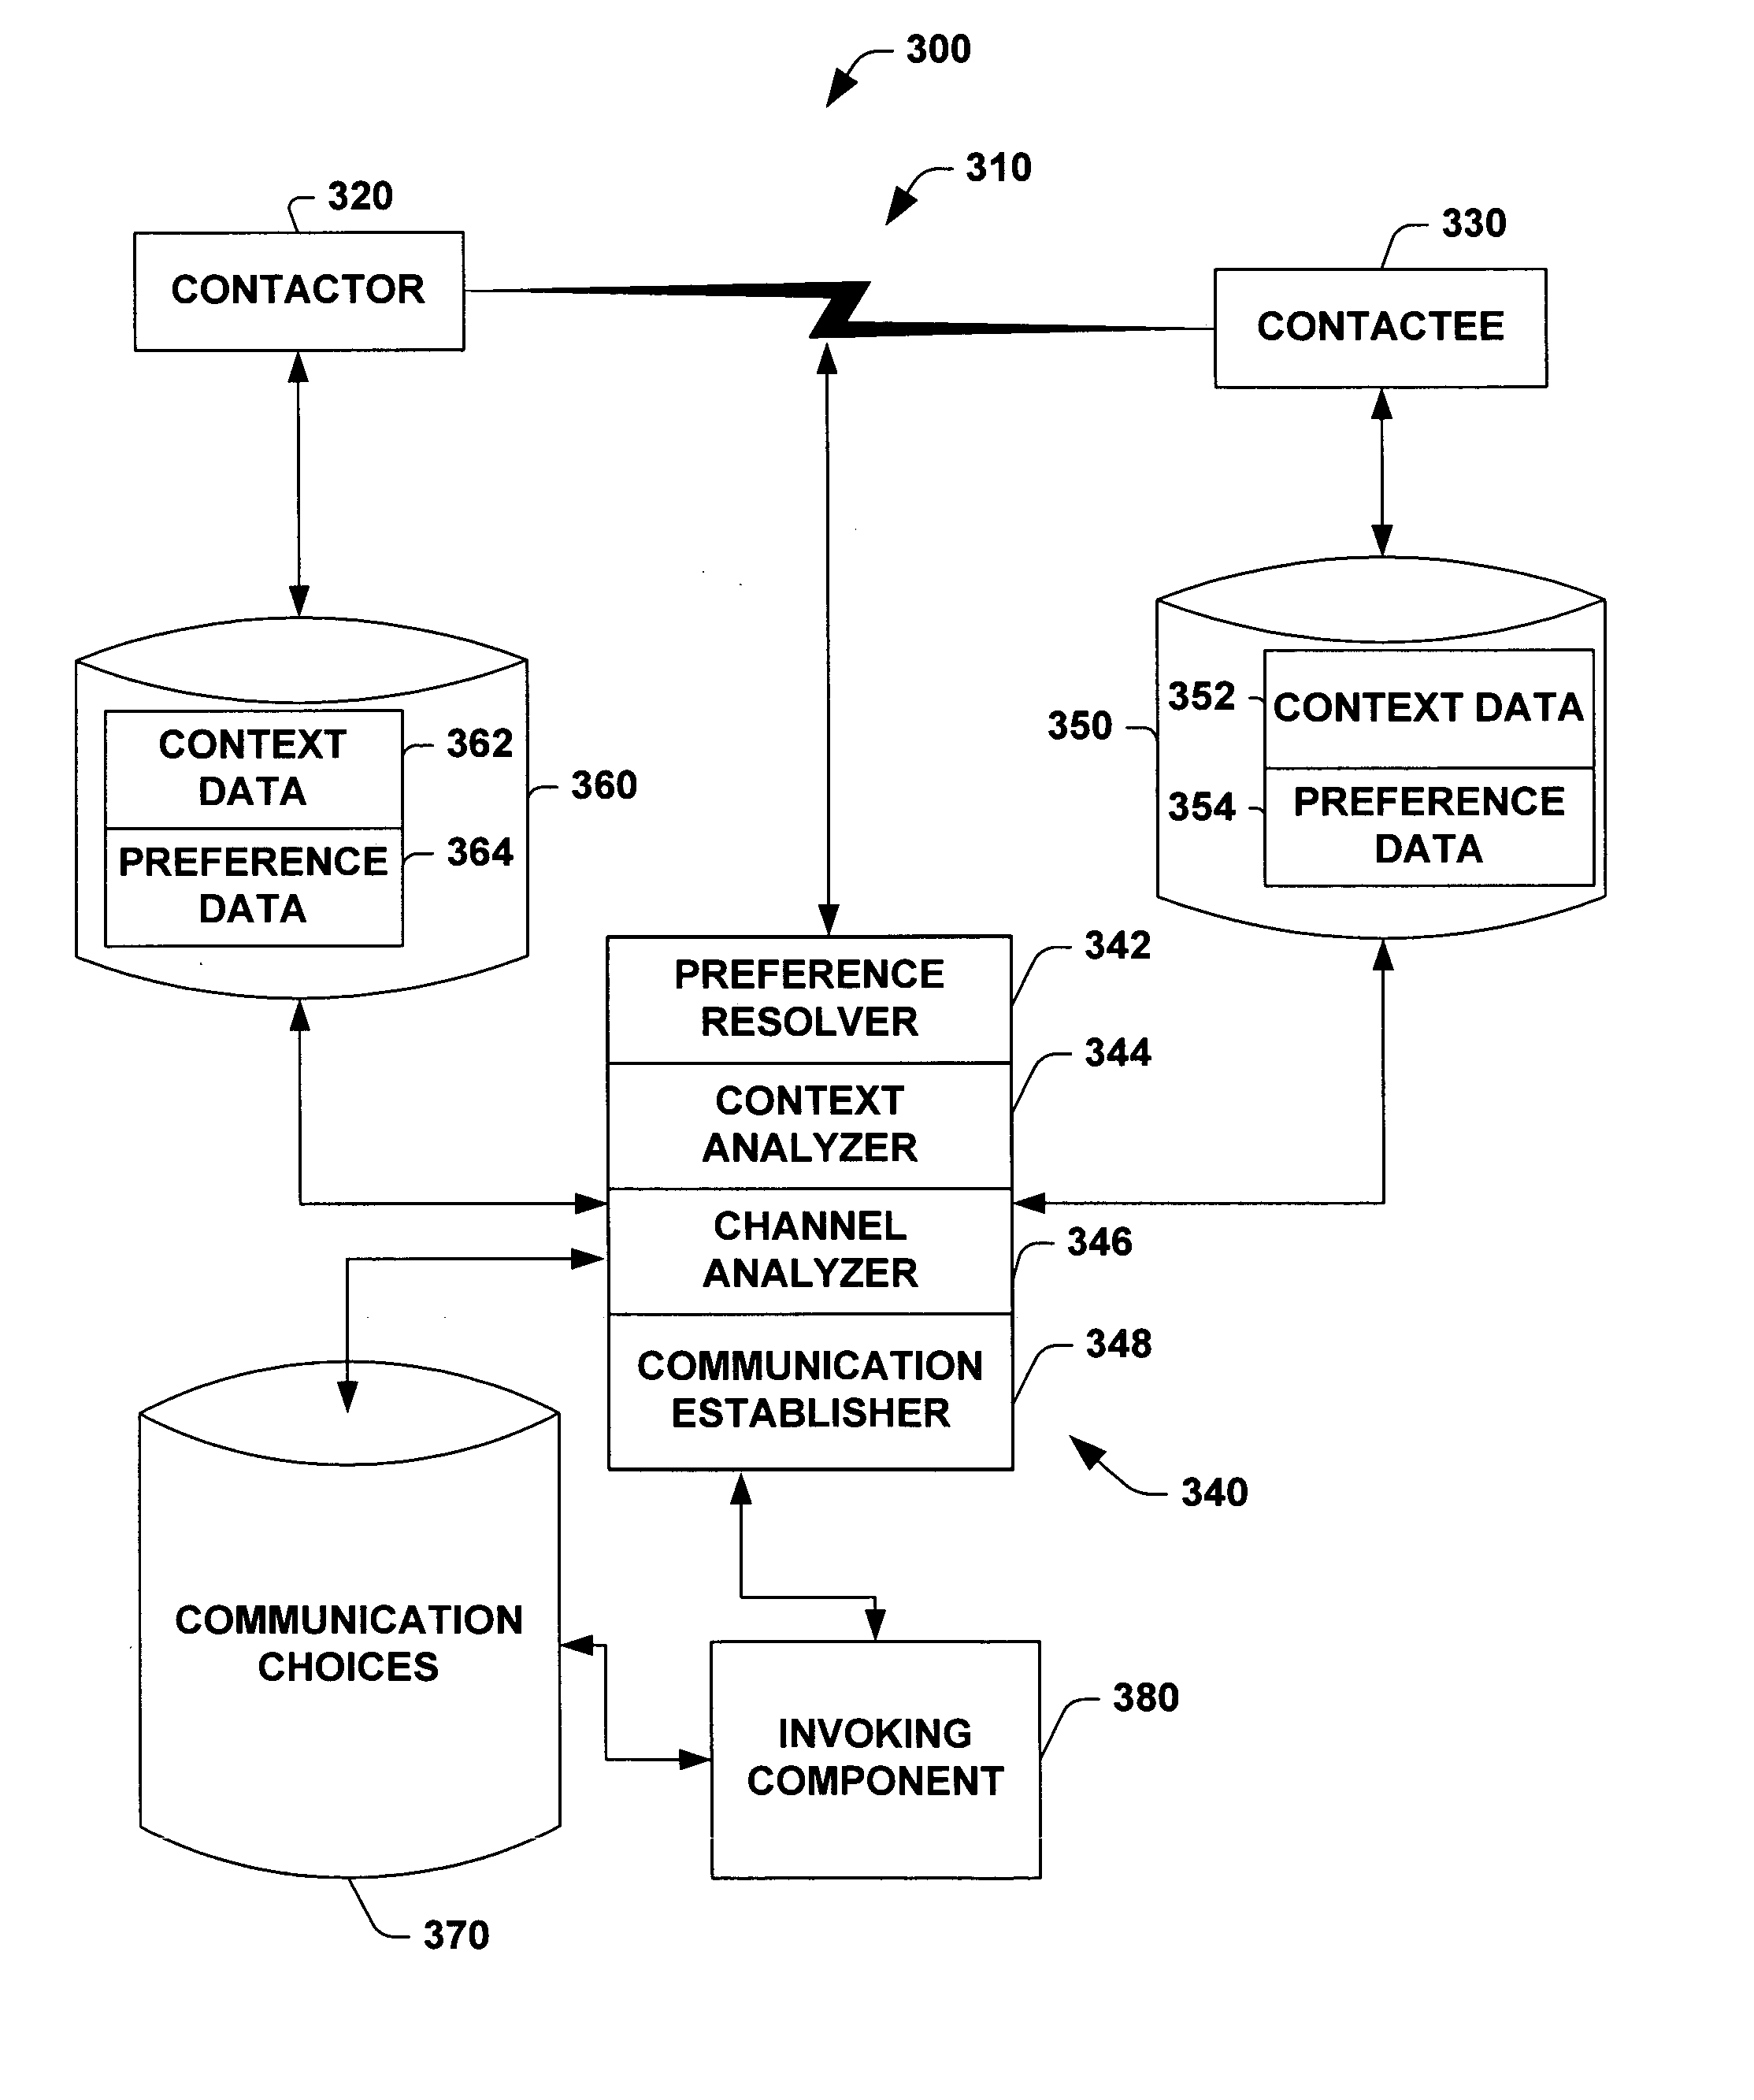 System and method for identifying and establishing preferred modalities or channels for communications based on participants' preferences and contexts